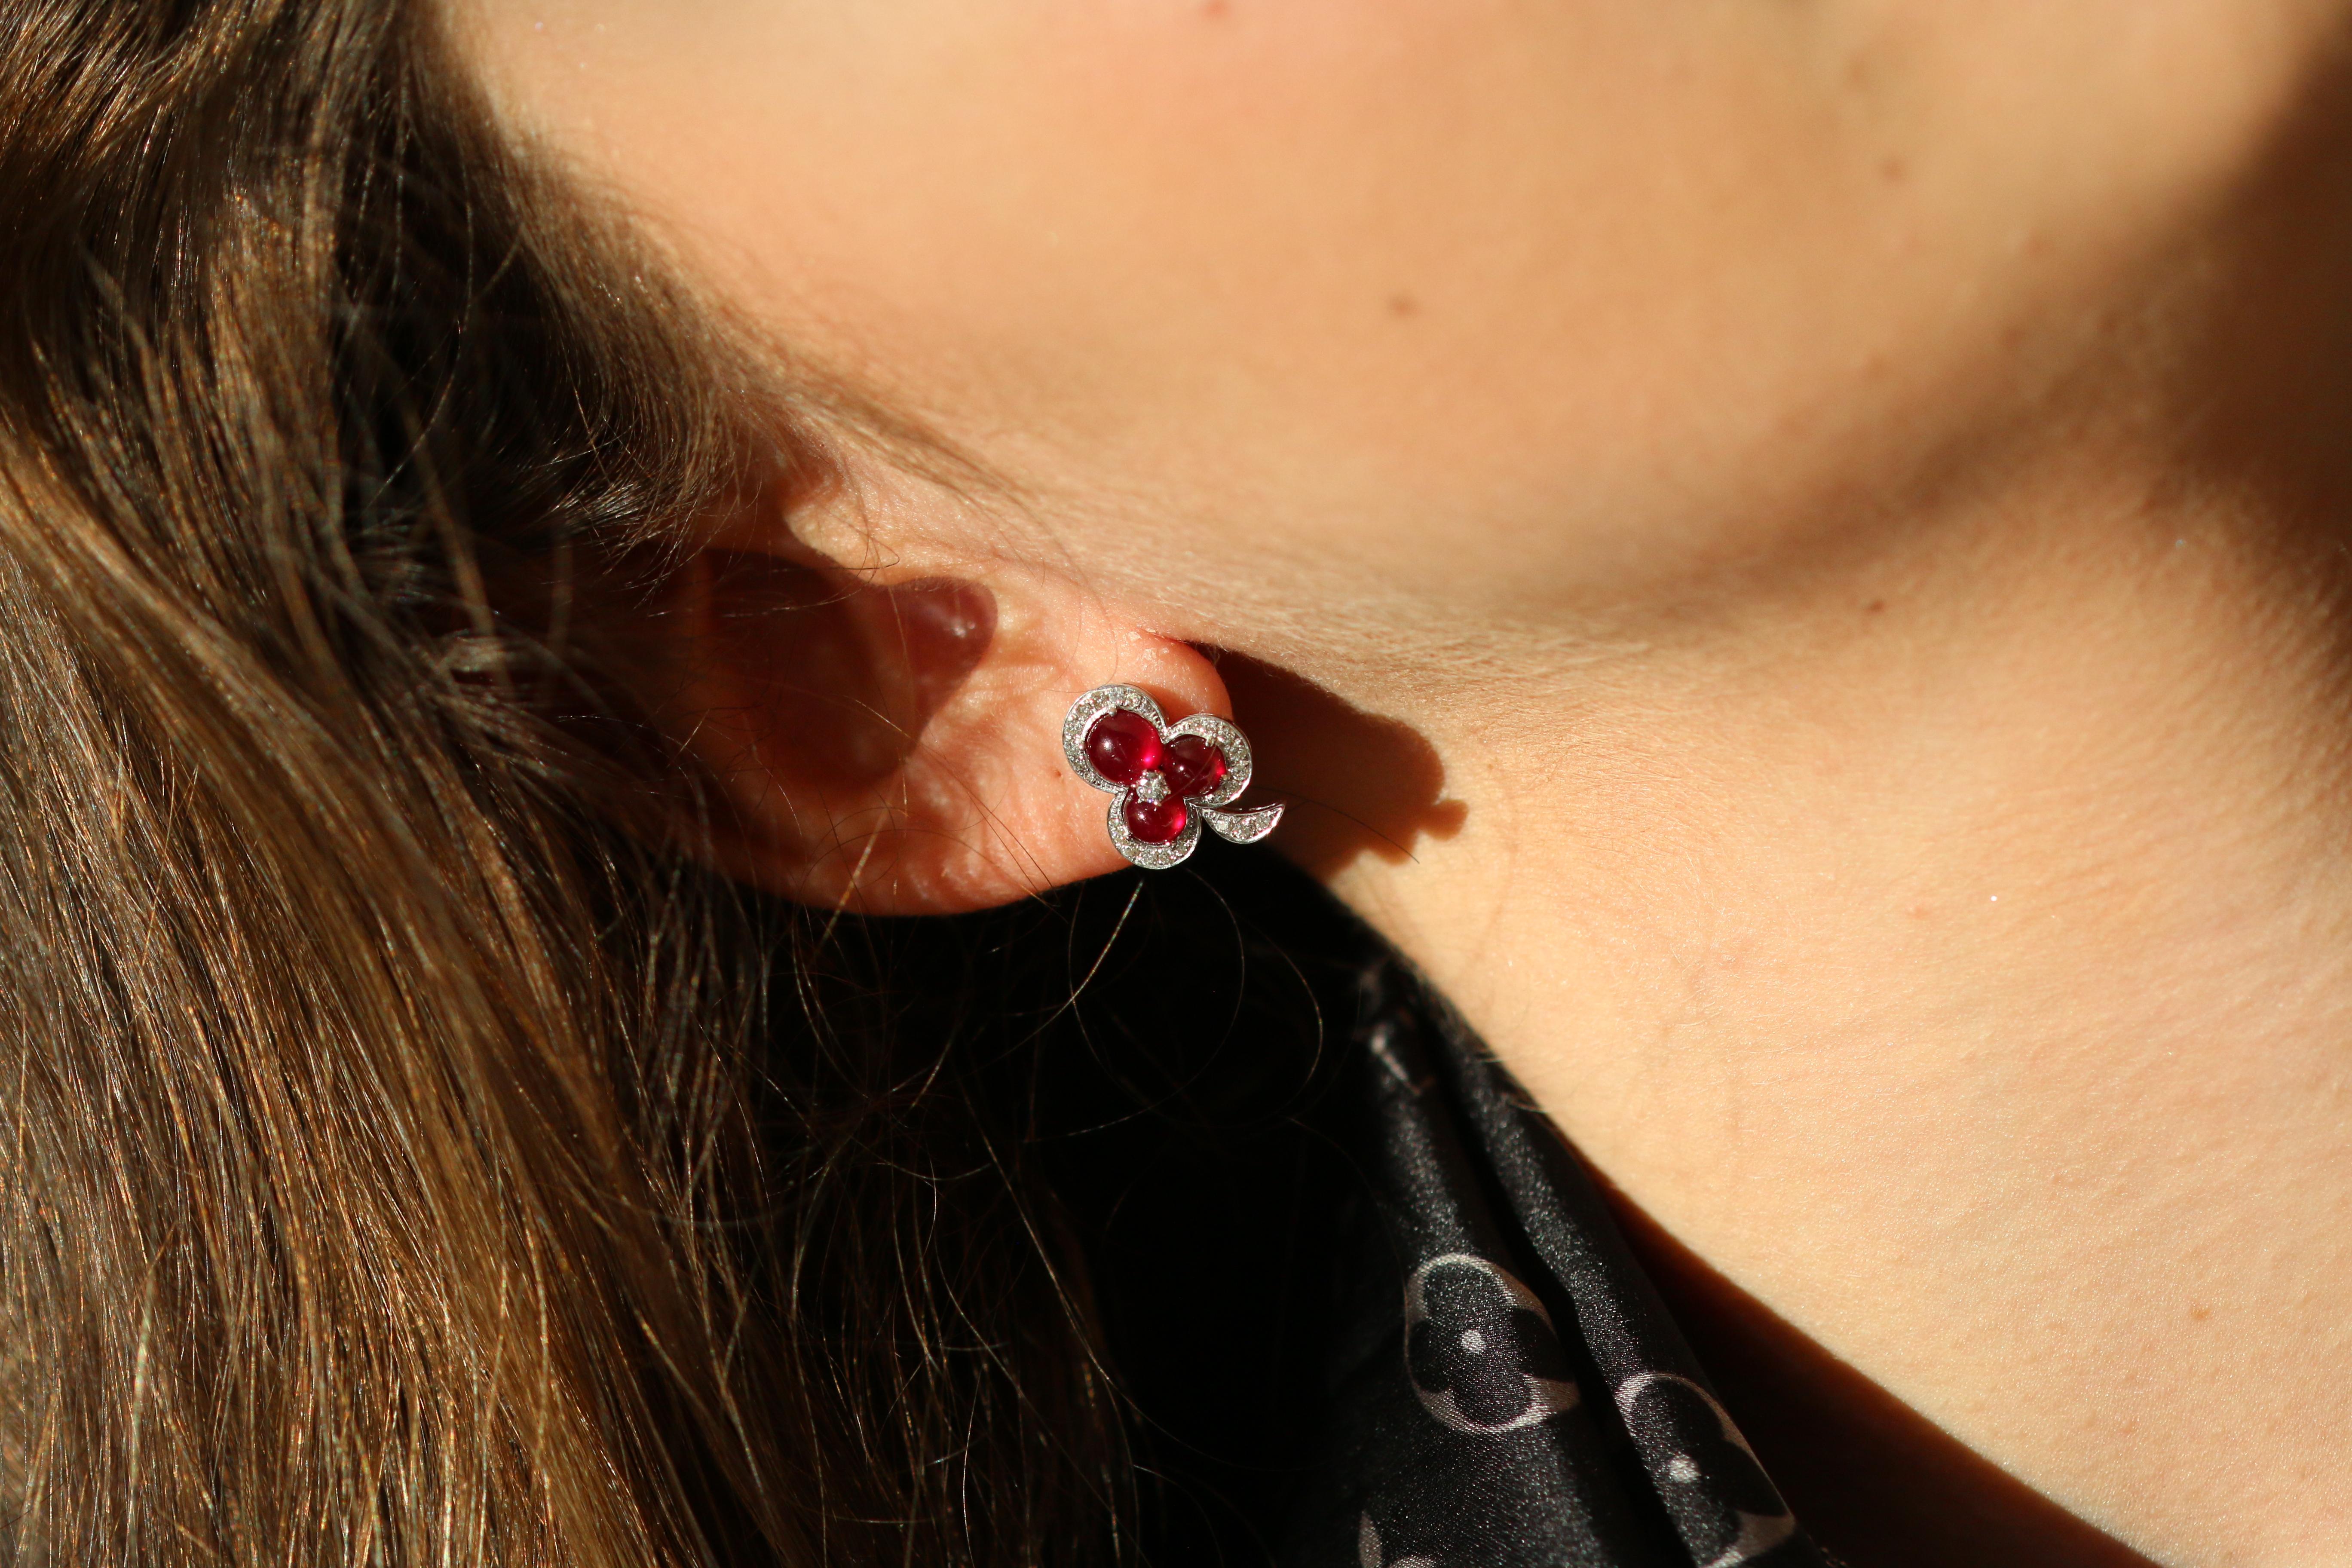 Wonderful ruby and diamond earrings full of delightful colour and delicate design. 

Pools of breathtaking blood red rubies help to create intoxicatingly stunning earrings, shaped as petals within a graceful flower. Bordered by brilliant bright and